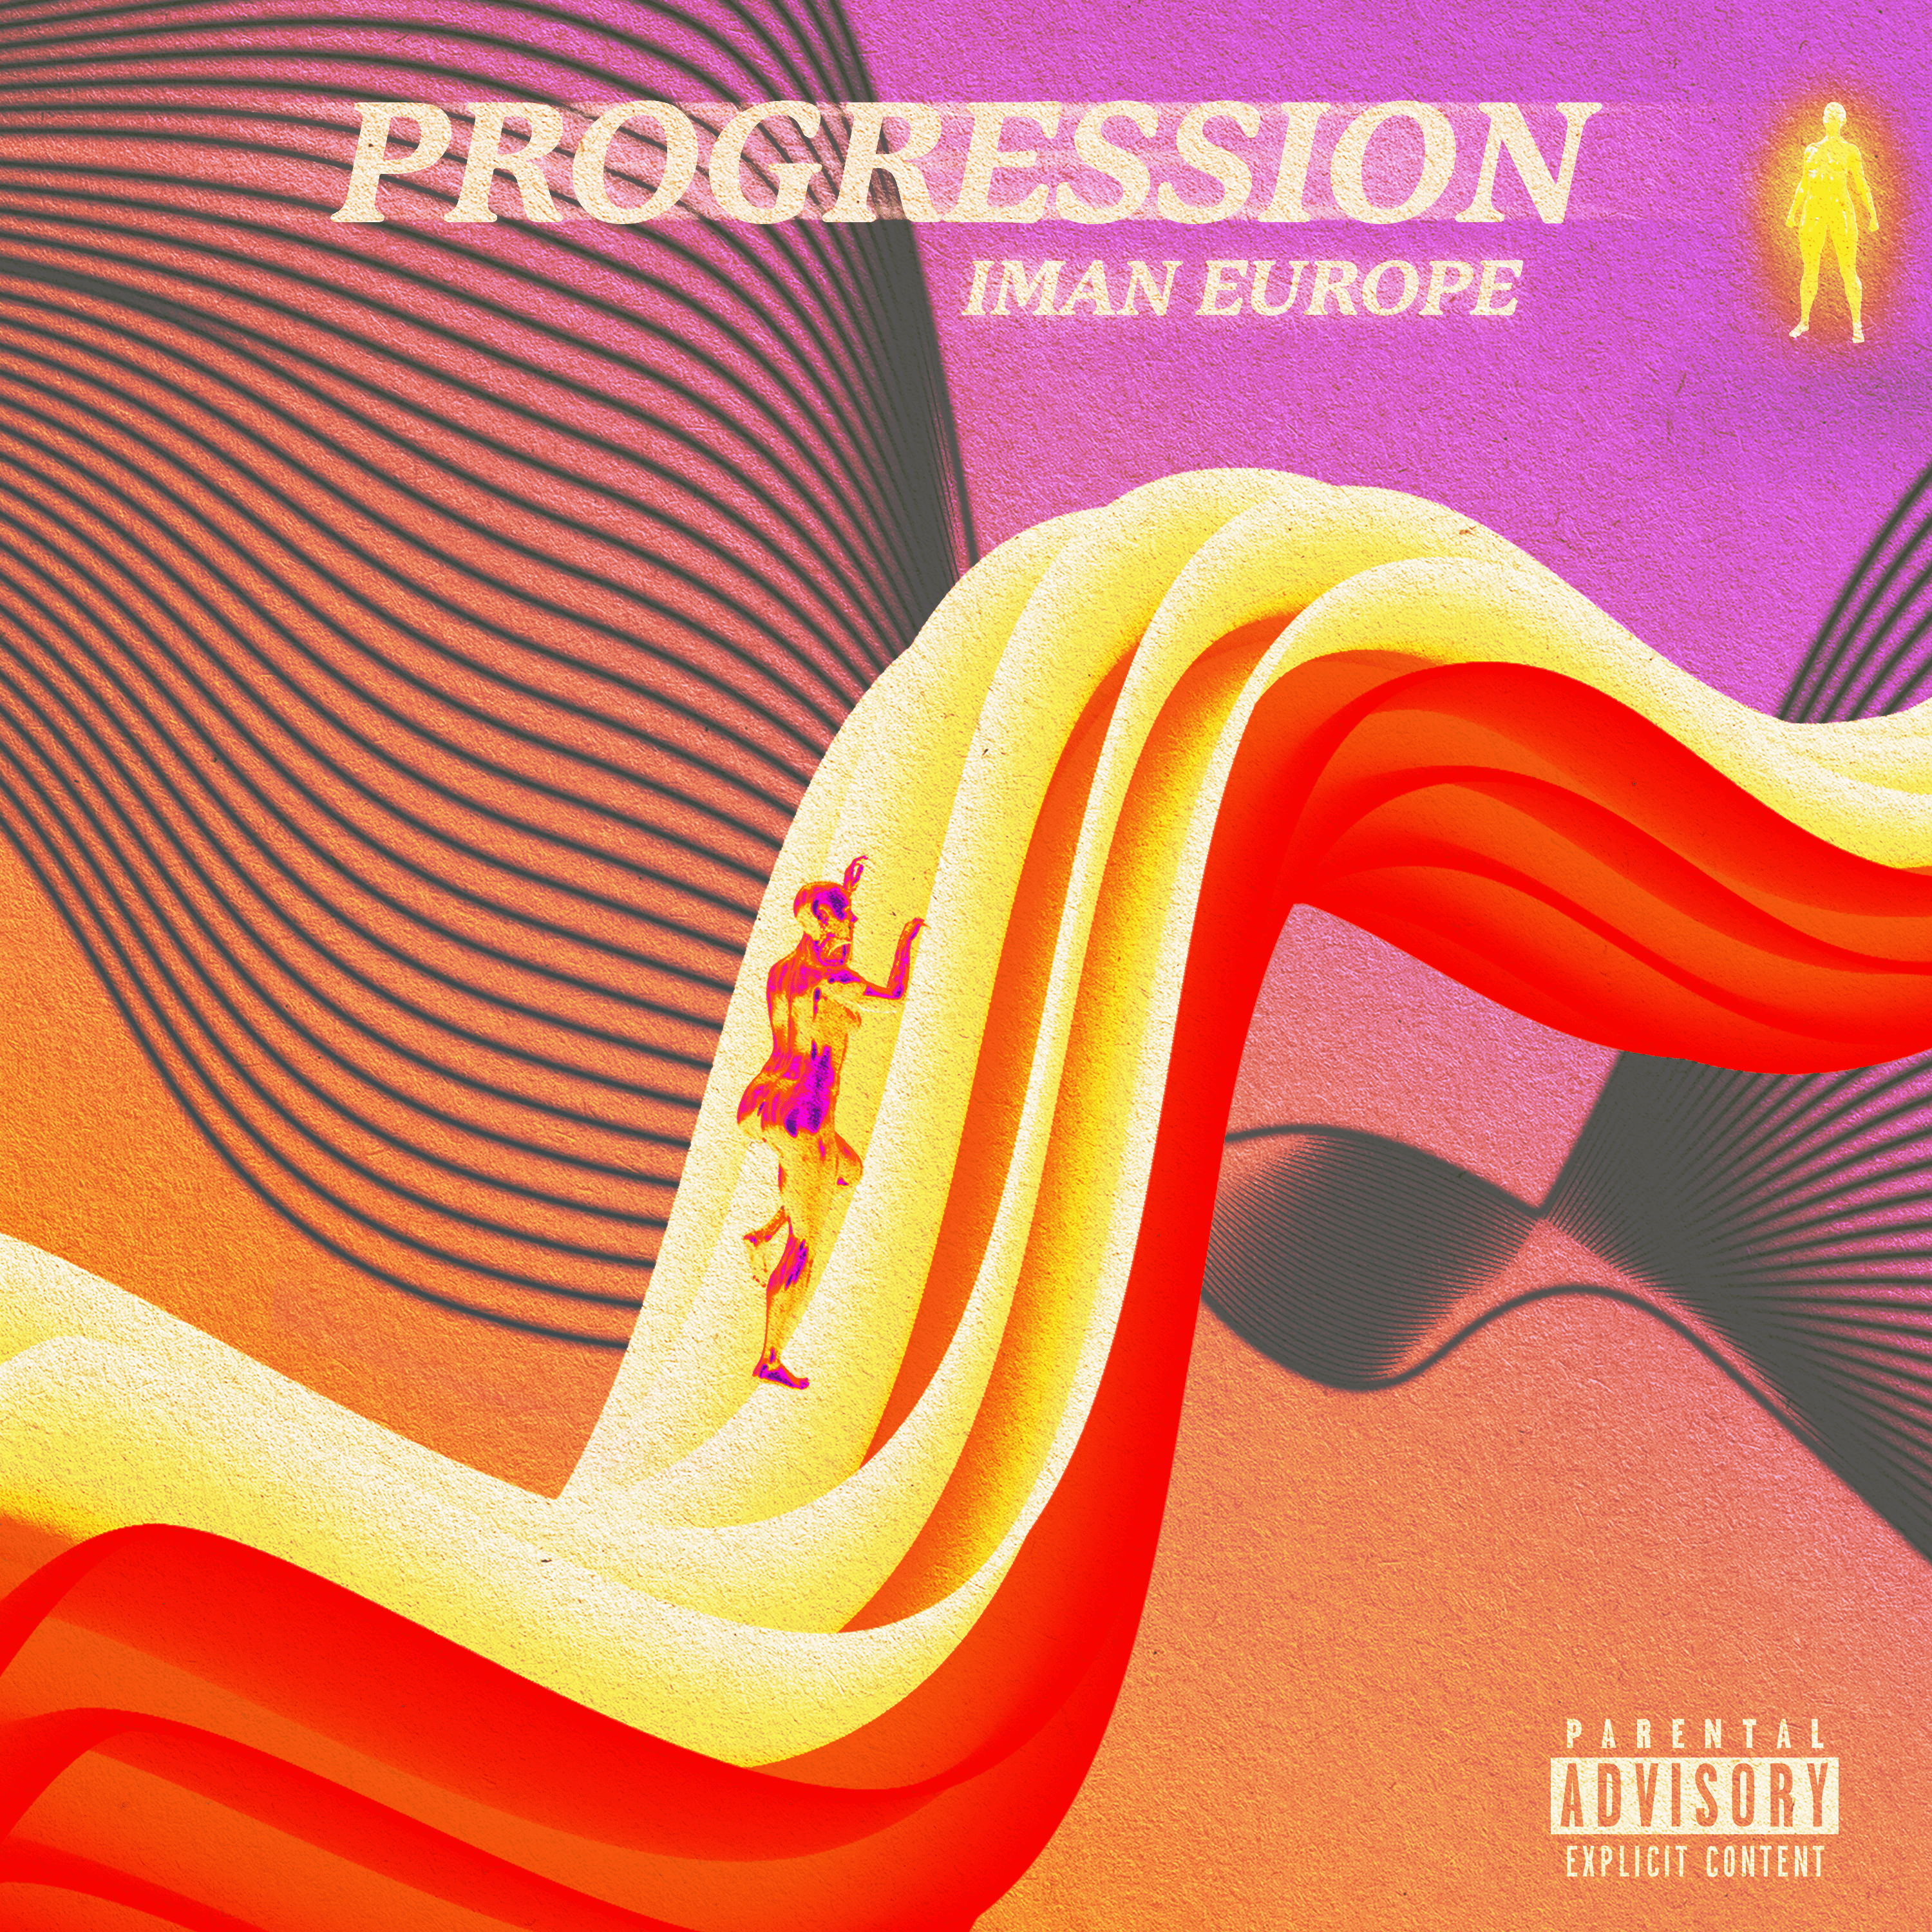 Cover art for Iman Europe's song: progression.